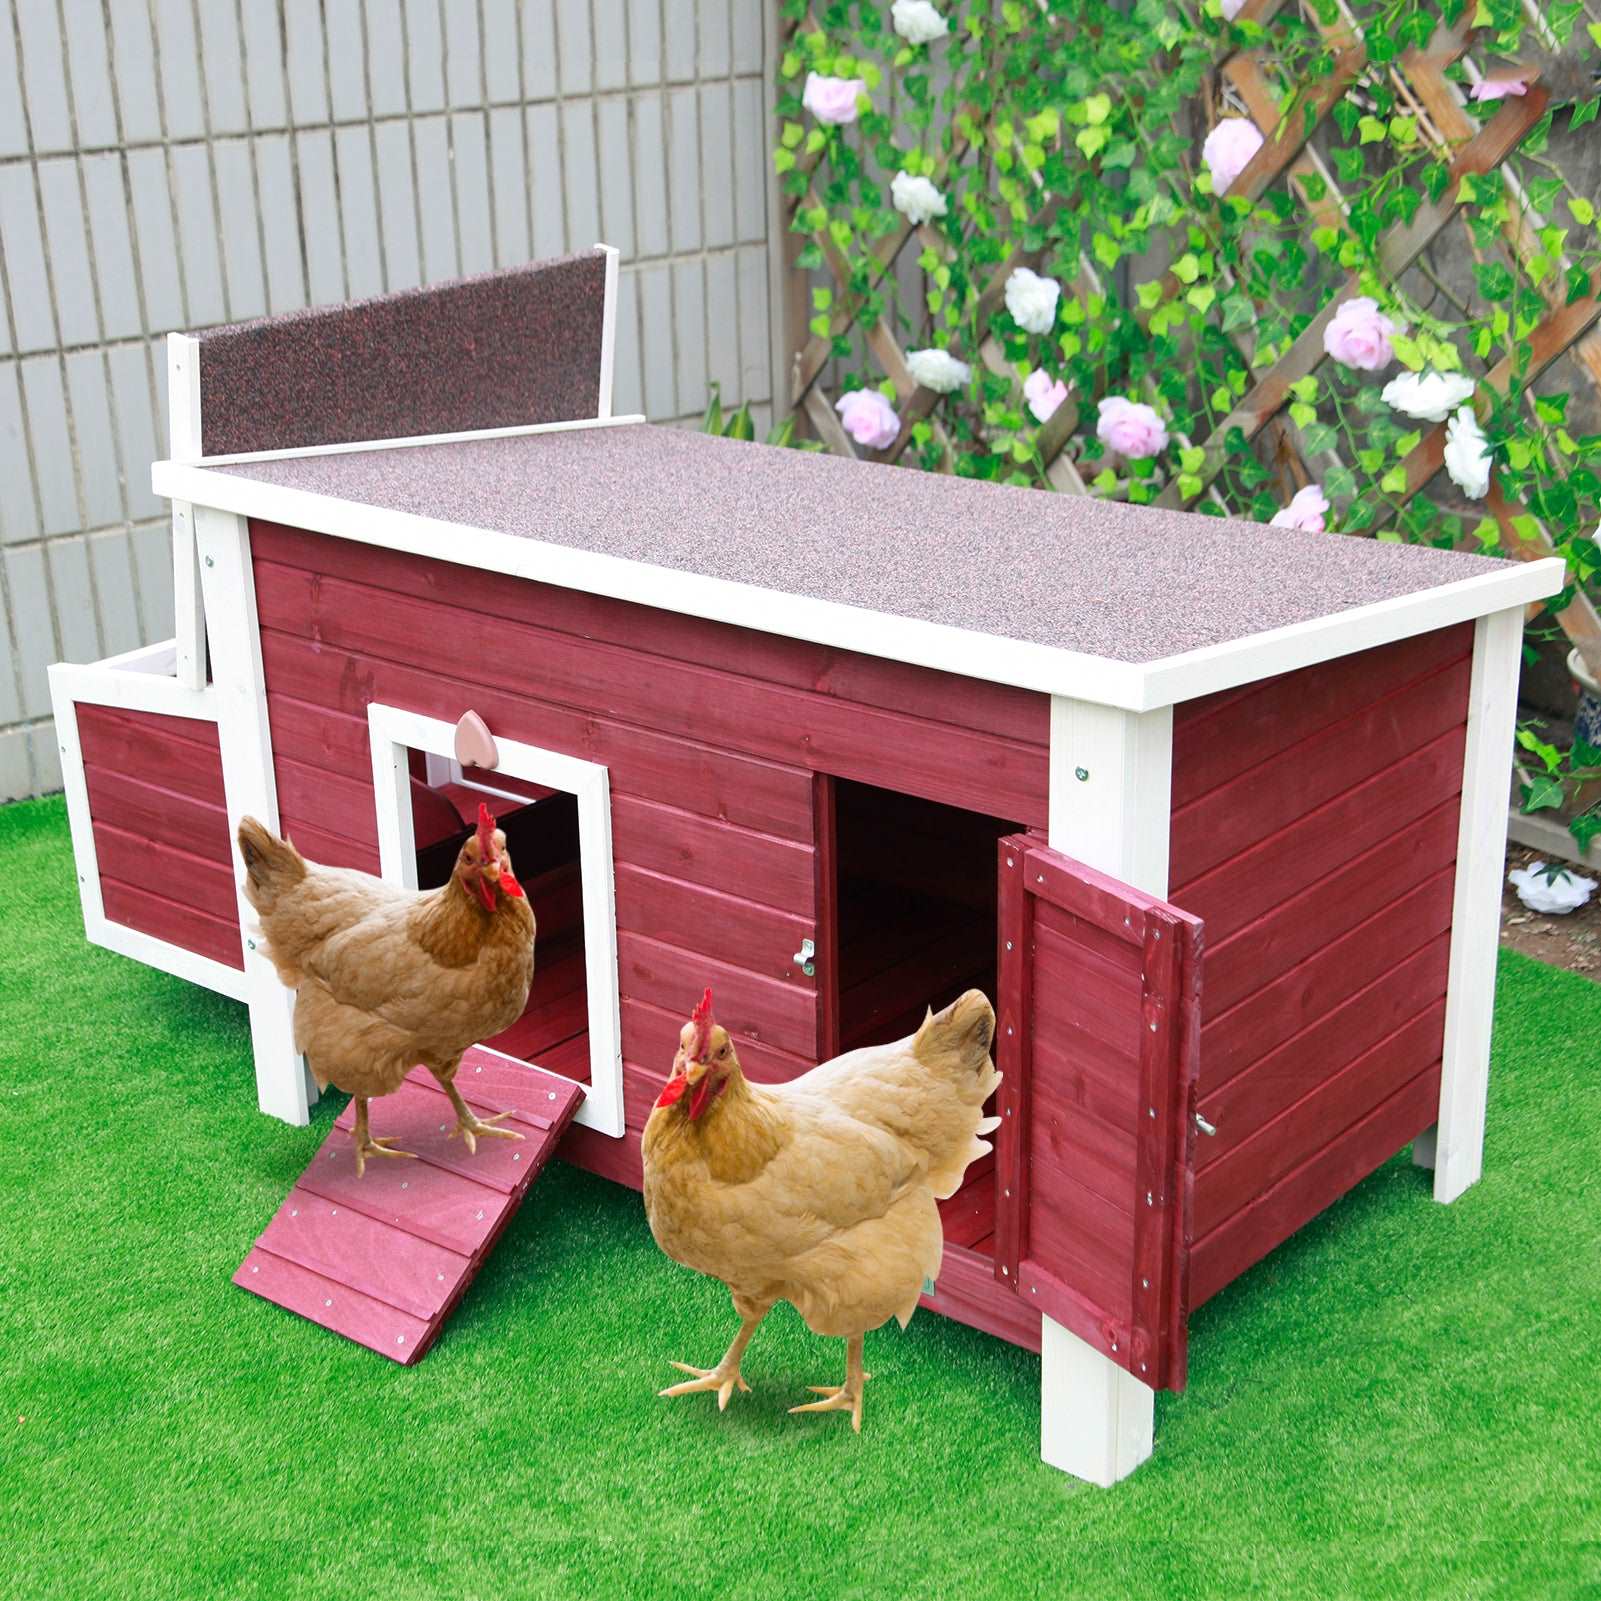 petsfit-chicken-coop-with-nesting-box-outdoor-hen-house-with-removable-bottom-for-easy-cleaning-weatherproof-poultry-cage-rabbit-hutch-wood-duck-house-red-07